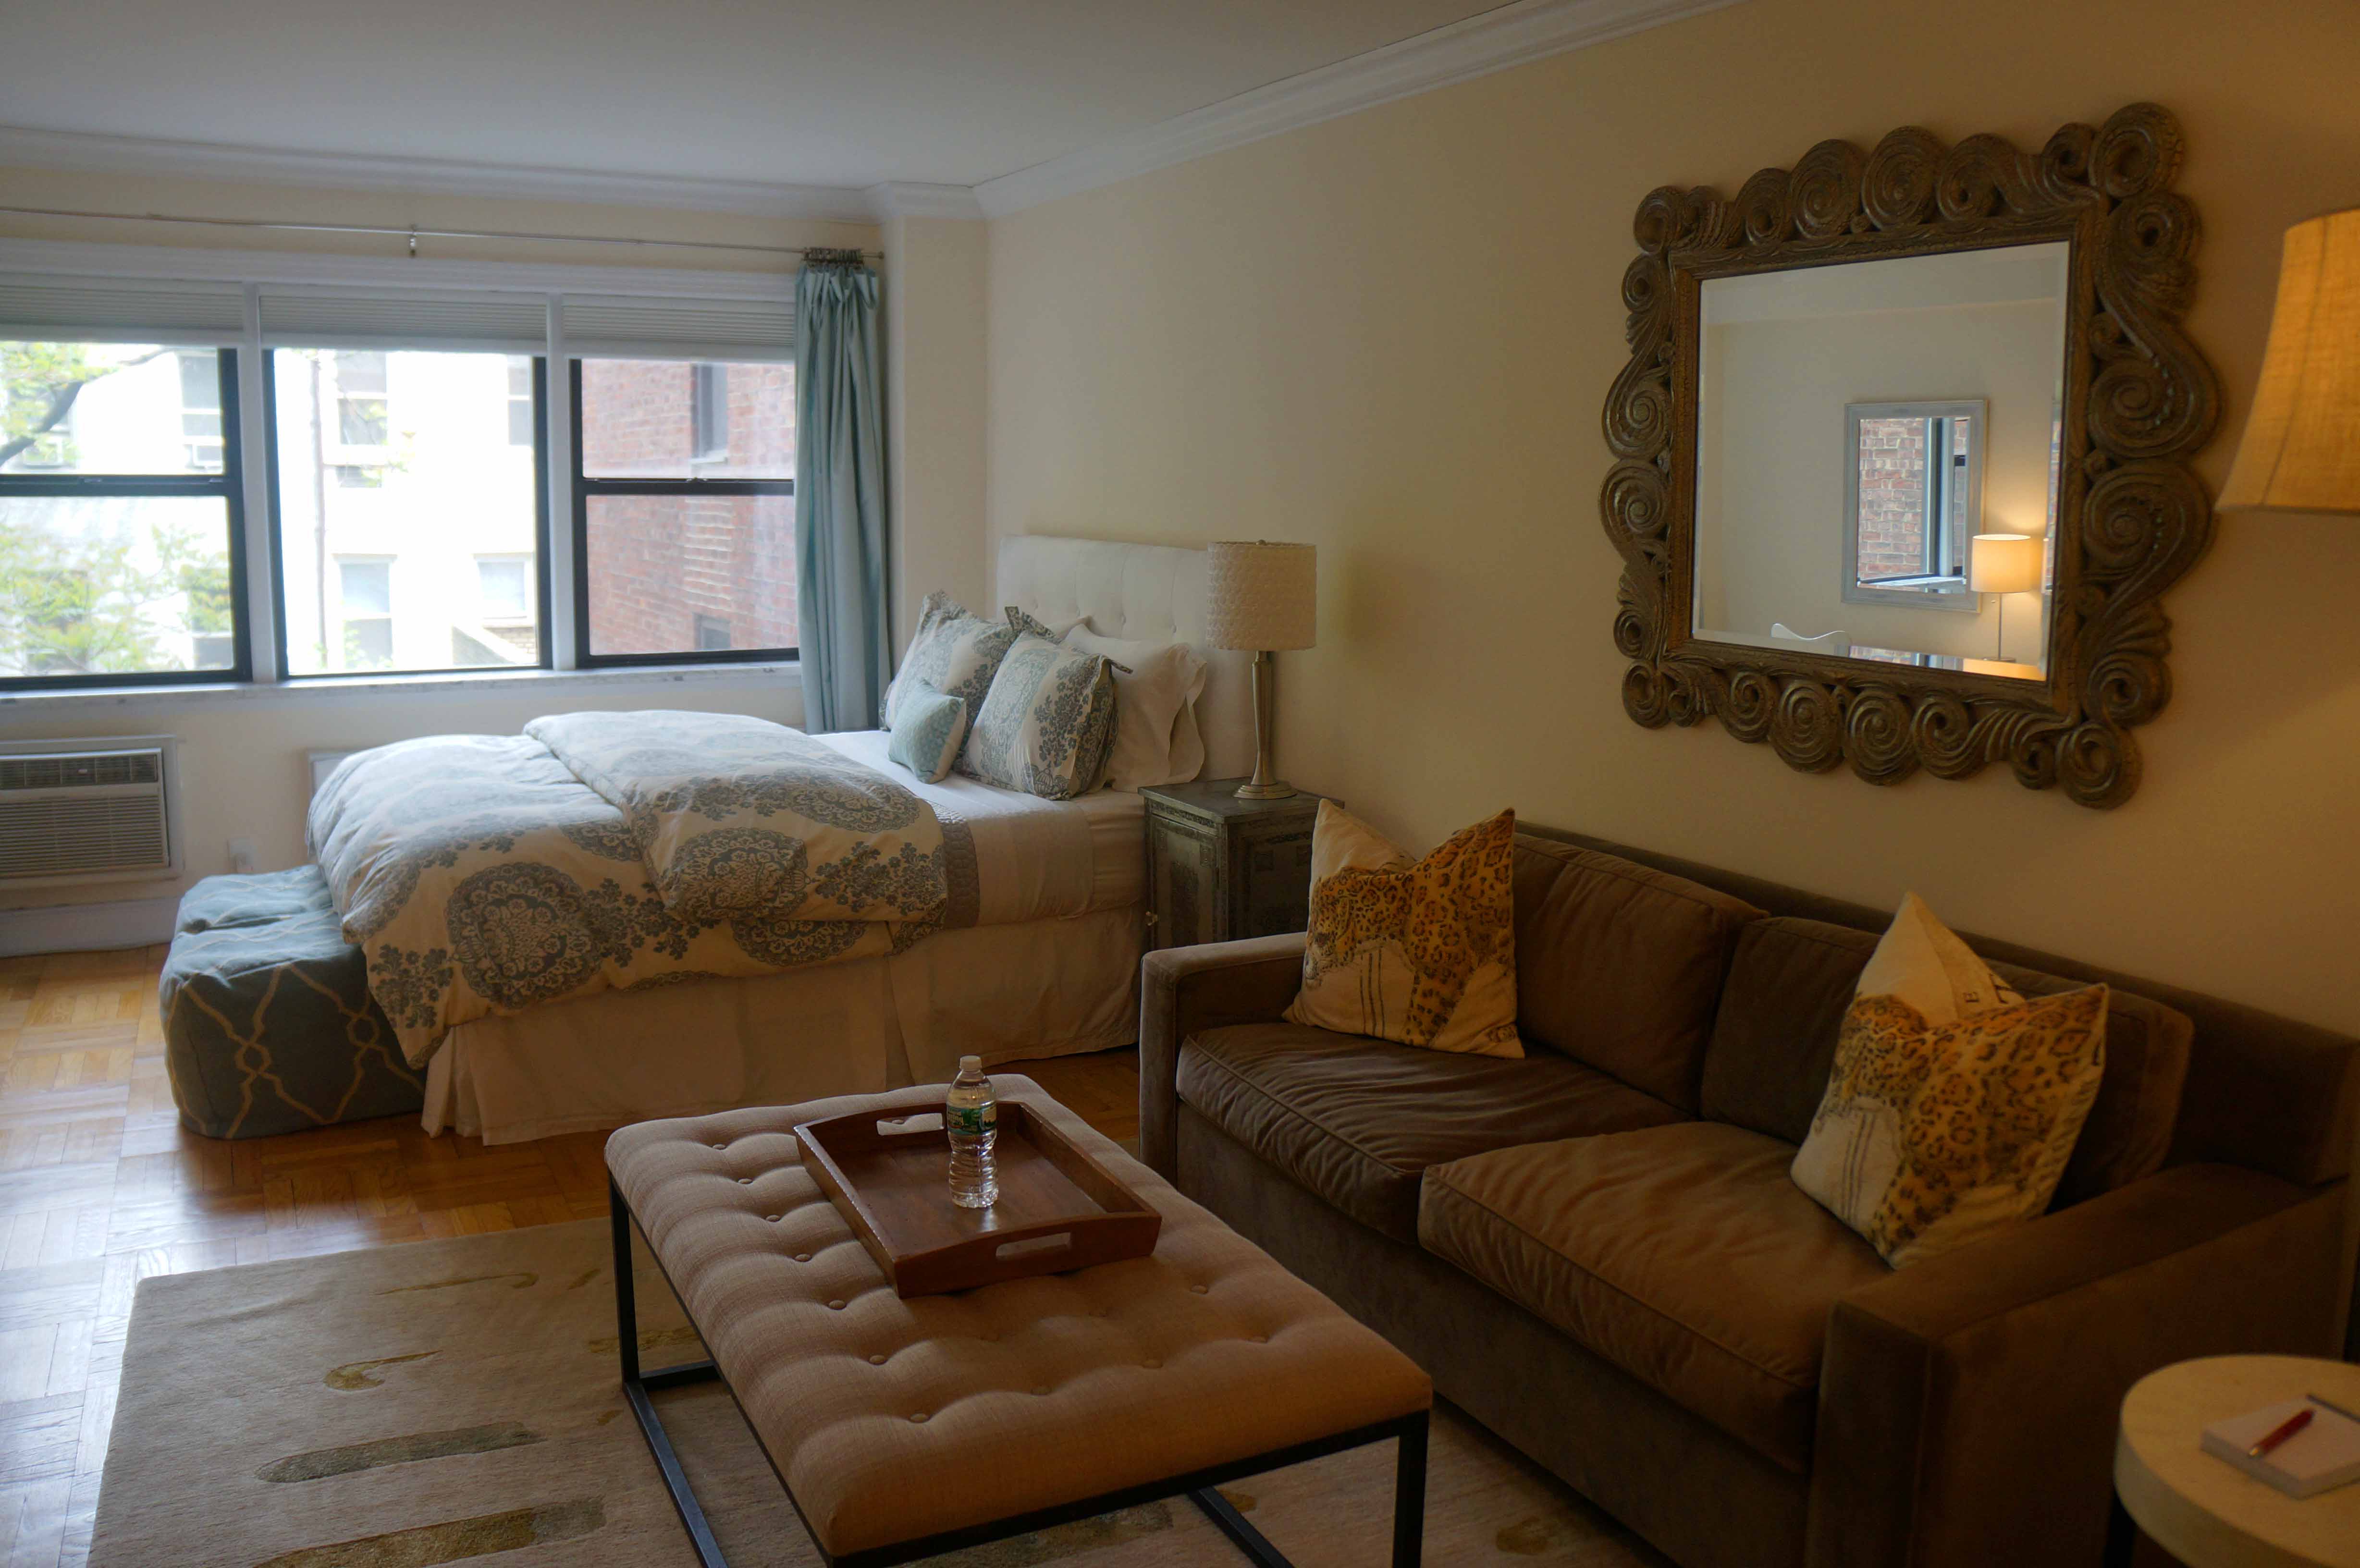 Apartment Rental In New York With Homeaway